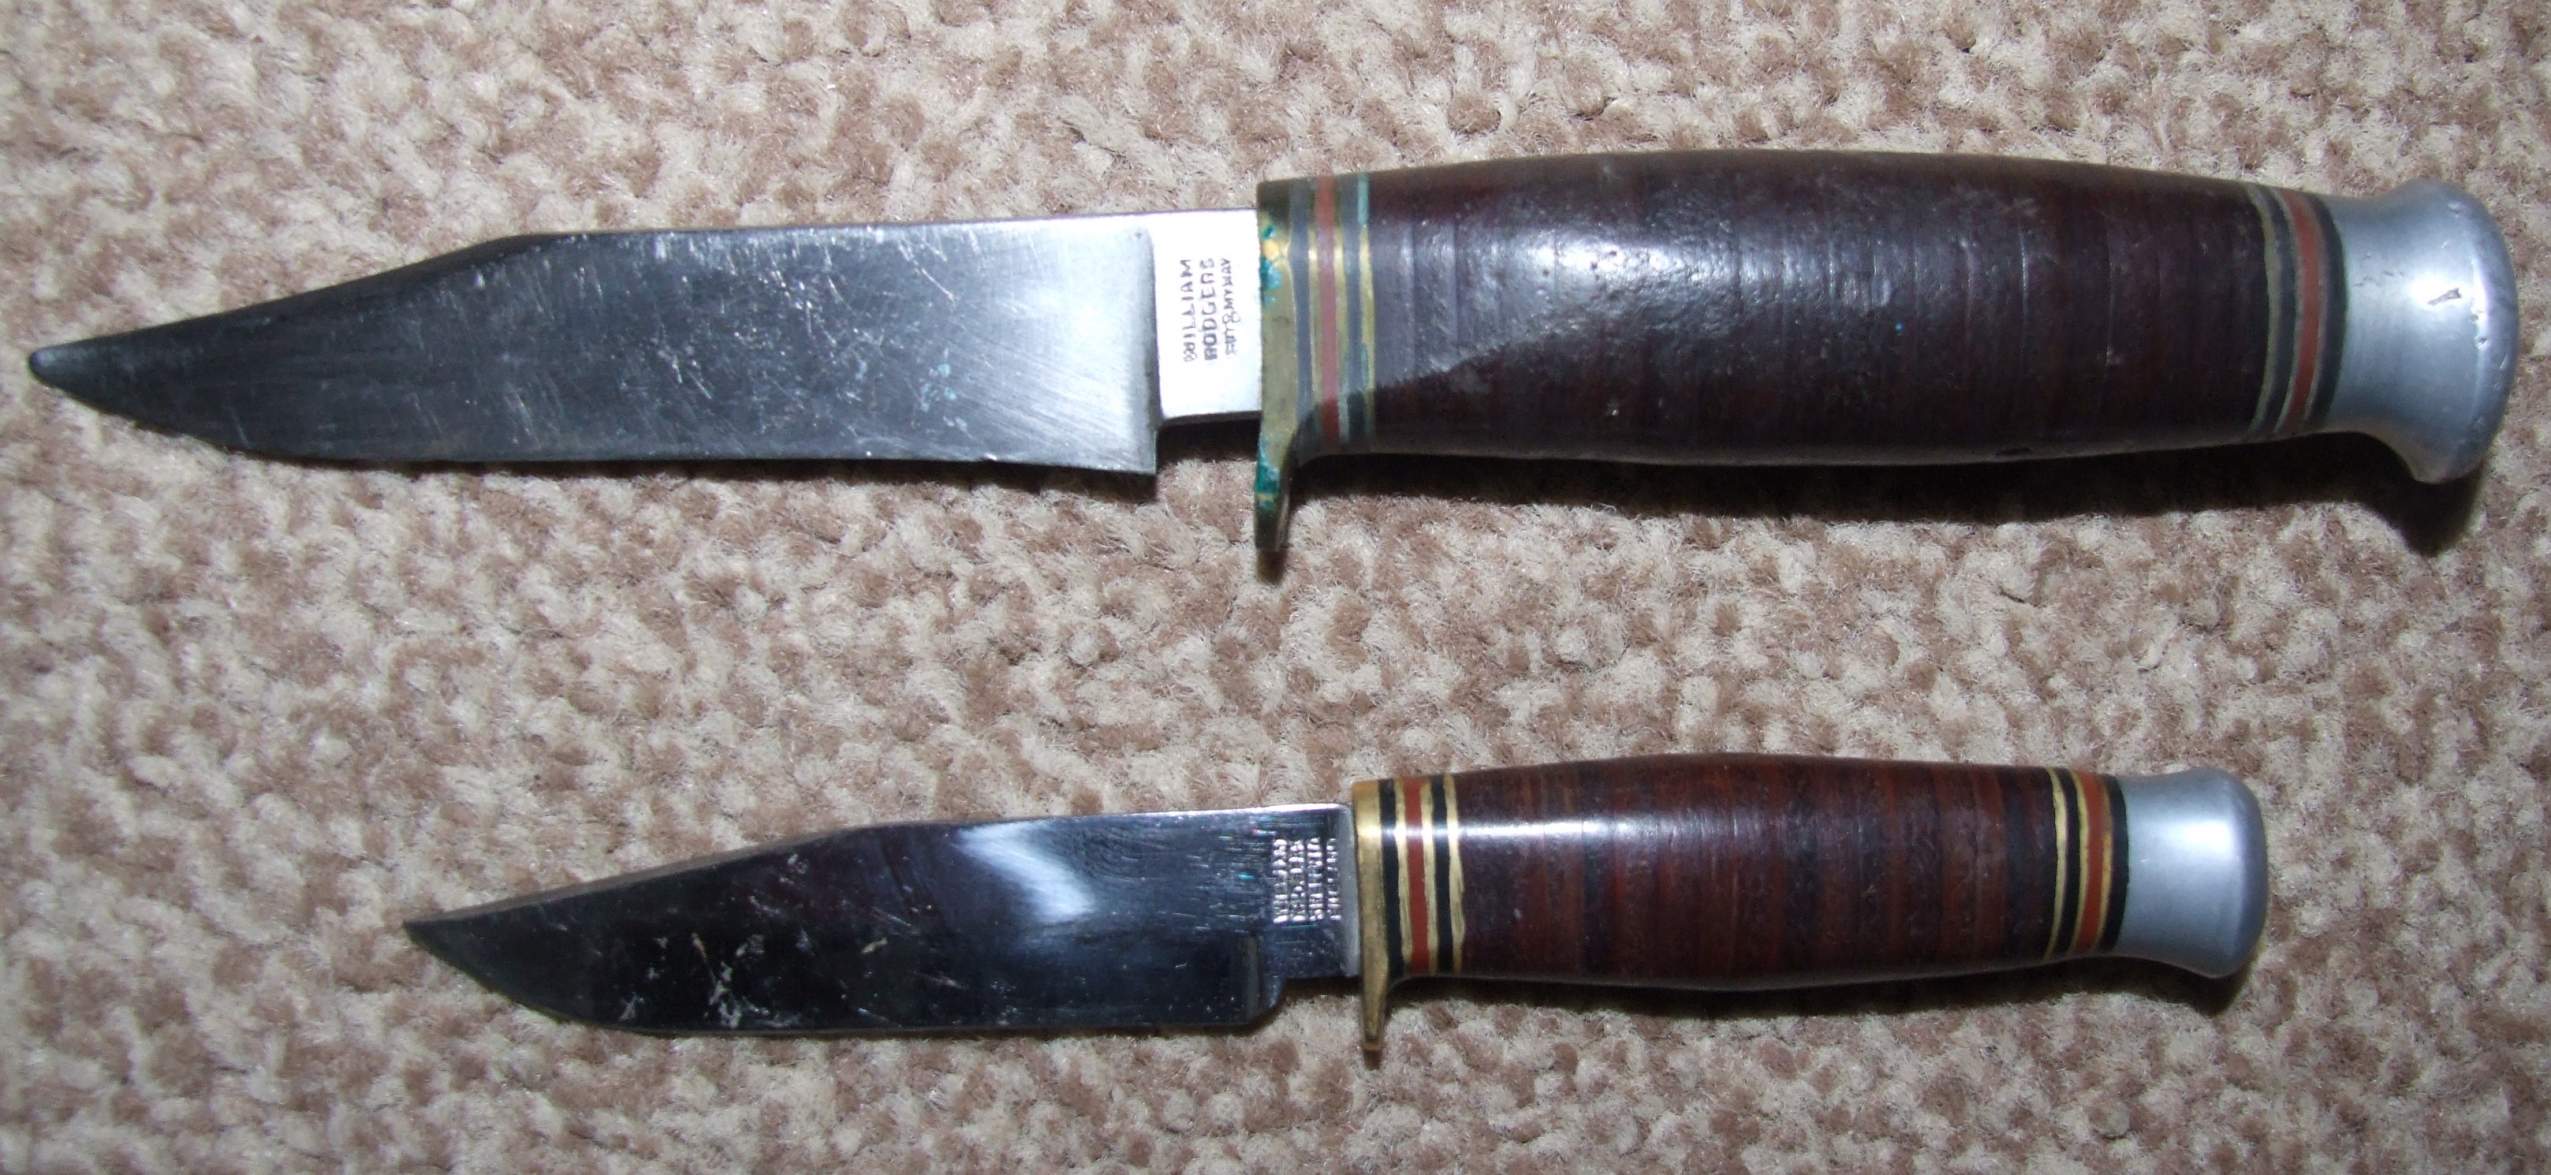 BOWIE KNIFE SHEFFIELD ENGLAND -WILLIAM RODGERS | Firearms & Military  Artifacts Knives & Blades Hunting Knives | Online Auctions | Proxibid